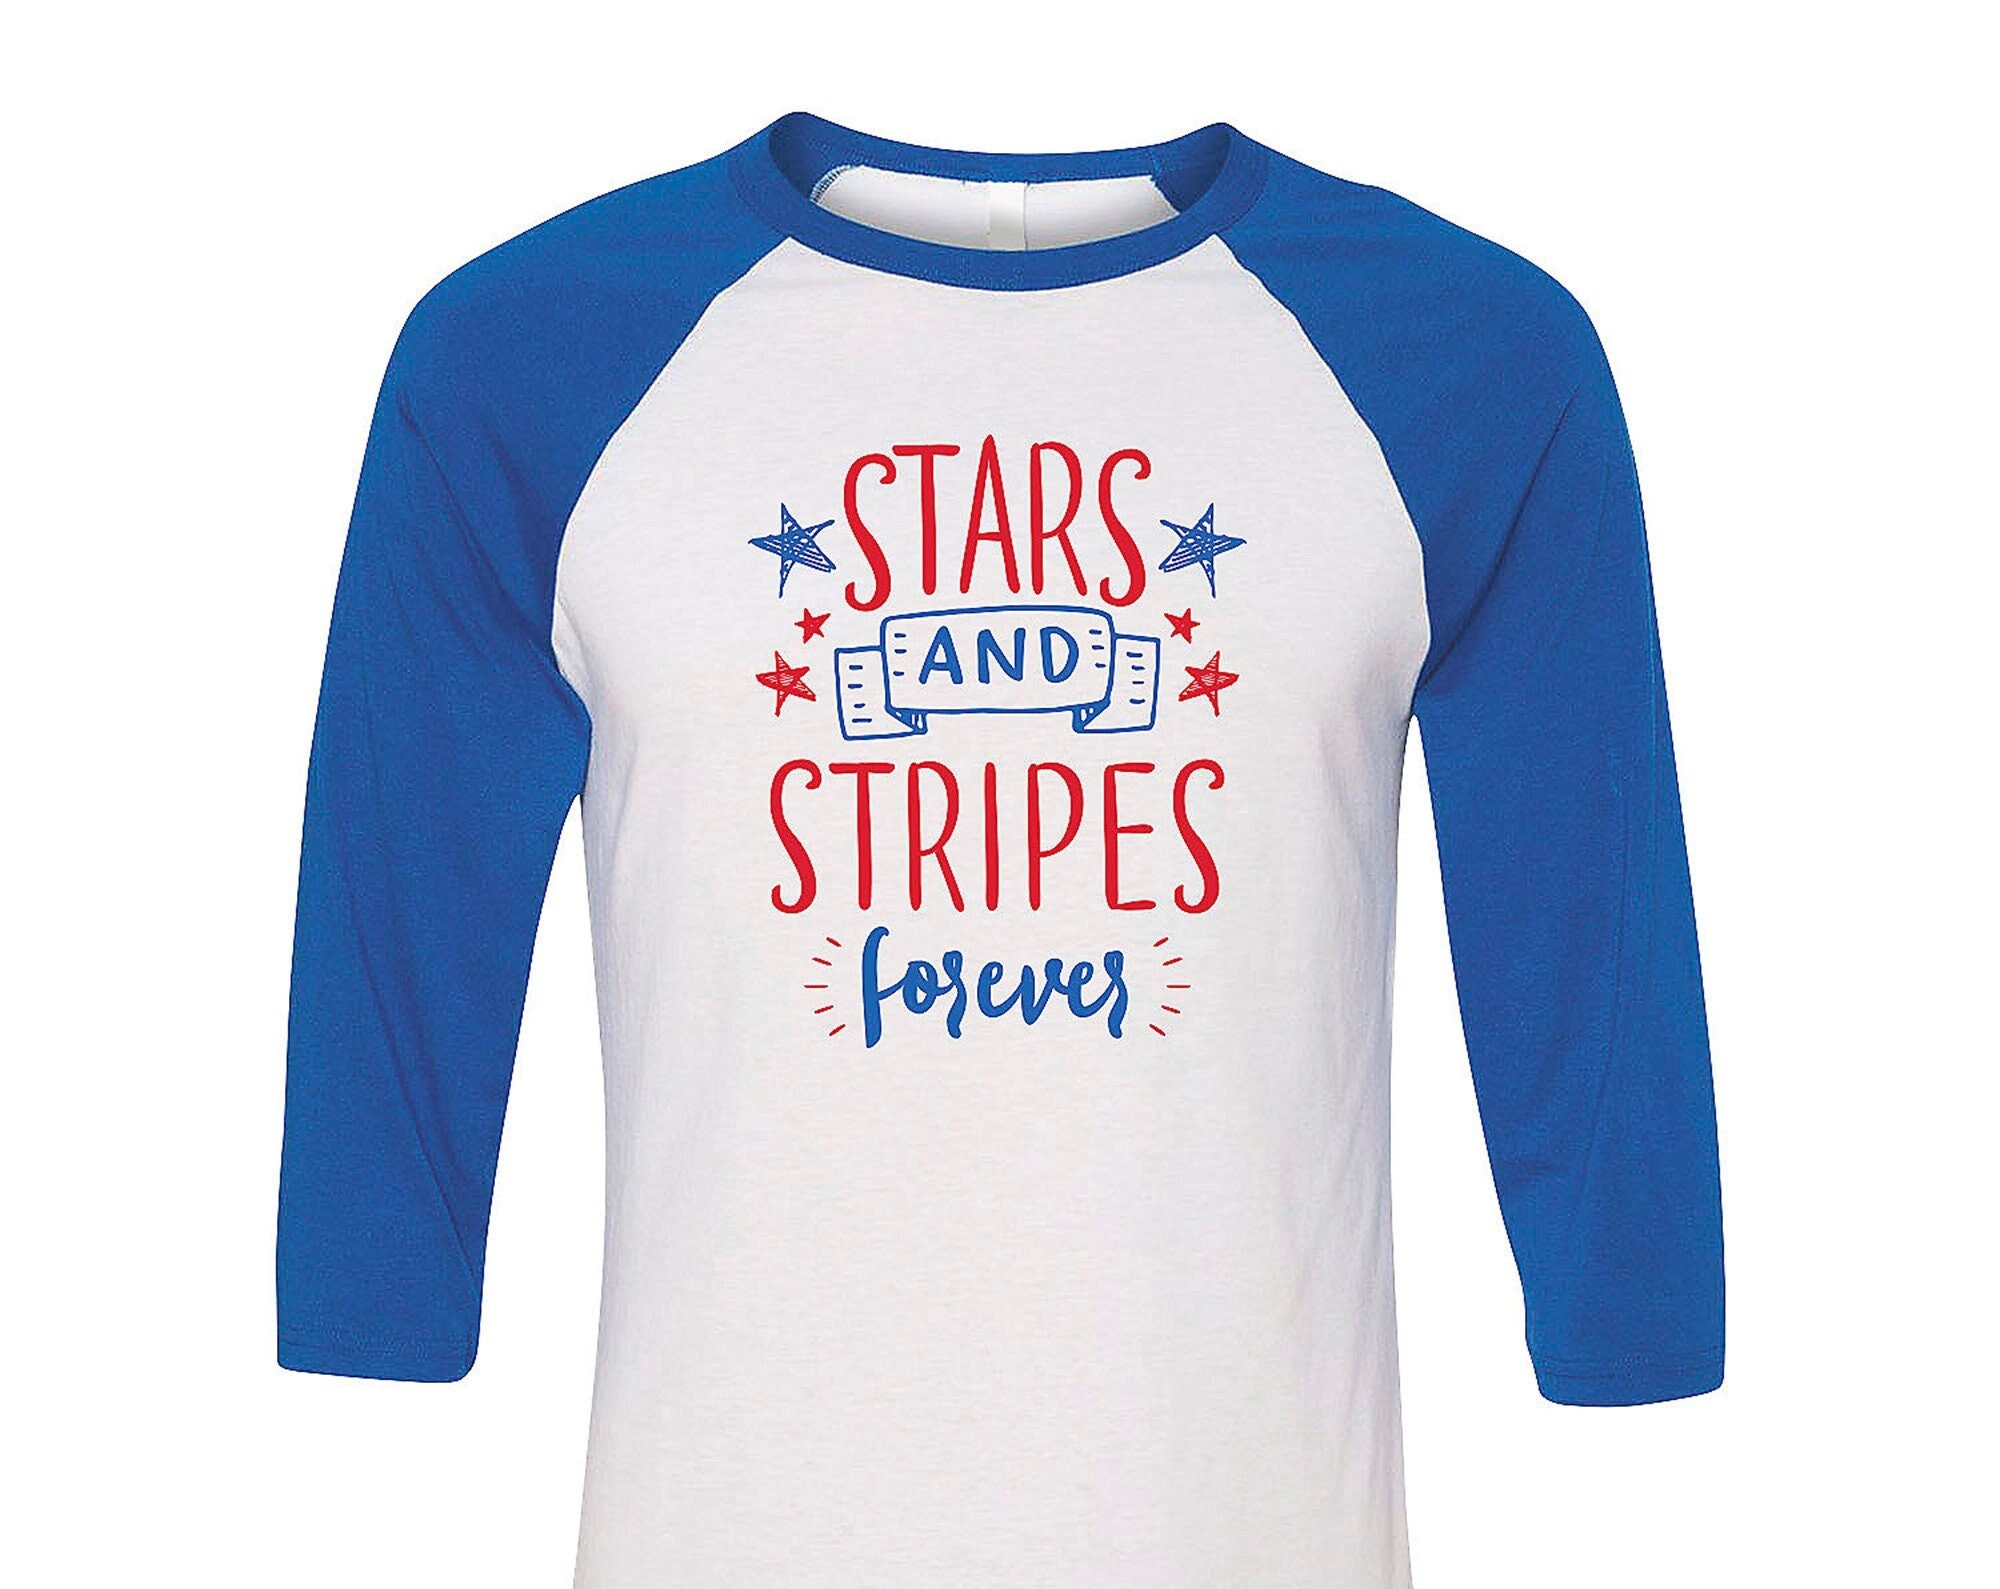 Discover Stars and Stripes Shirt Fourth of July Tee Unisex 3/4 Baseball Tee